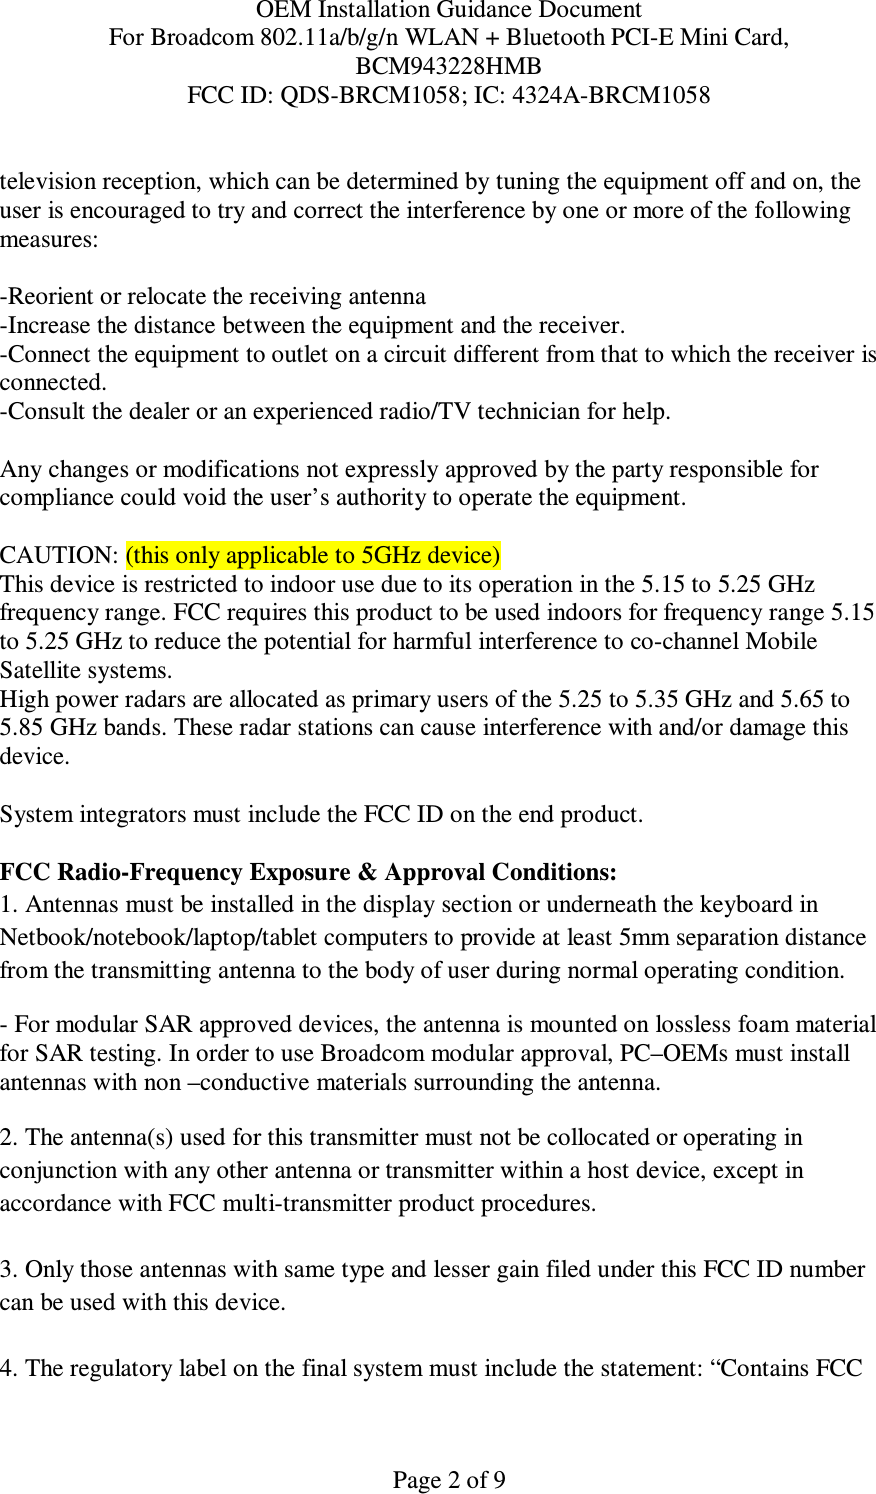 OEM Installation Guidance Document For Broadcom 802.11a/b/g/n WLAN + Bluetooth PCI-E Mini Card,  BCM943228HMB FCC ID: QDS-BRCM1058; IC: 4324A-BRCM1058   Page 2 of 9 television reception, which can be determined by tuning the equipment off and on, the user is encouraged to try and correct the interference by one or more of the following measures:    -Reorient or relocate the receiving antenna -Increase the distance between the equipment and the receiver. -Connect the equipment to outlet on a circuit different from that to which the receiver is connected. -Consult the dealer or an experienced radio/TV technician for help.  Any changes or modifications not expressly approved by the party responsible for compliance could void the user’s authority to operate the equipment.  CAUTION: (this only applicable to 5GHz device) This device is restricted to indoor use due to its operation in the 5.15 to 5.25 GHz frequency range. FCC requires this product to be used indoors for frequency range 5.15 to 5.25 GHz to reduce the potential for harmful interference to co-channel Mobile Satellite systems. High power radars are allocated as primary users of the 5.25 to 5.35 GHz and 5.65 to 5.85 GHz bands. These radar stations can cause interference with and/or damage this device.  System integrators must include the FCC ID on the end product.   FCC Radio-Frequency Exposure &amp; Approval Conditions: 1. Antennas must be installed in the display section or underneath the keyboard in  Netbook/notebook/laptop/tablet computers to provide at least 5mm separation distance from the transmitting antenna to the body of user during normal operating condition. - For modular SAR approved devices, the antenna is mounted on lossless foam material for SAR testing. In order to use Broadcom modular approval, PC–OEMs must install antennas with non –conductive materials surrounding the antenna.   2. The antenna(s) used for this transmitter must not be collocated or operating in conjunction with any other antenna or transmitter within a host device, except in accordance with FCC multi-transmitter product procedures.  3. Only those antennas with same type and lesser gain filed under this FCC ID number can be used with this device.  4. The regulatory label on the final system must include the statement: “Contains FCC 